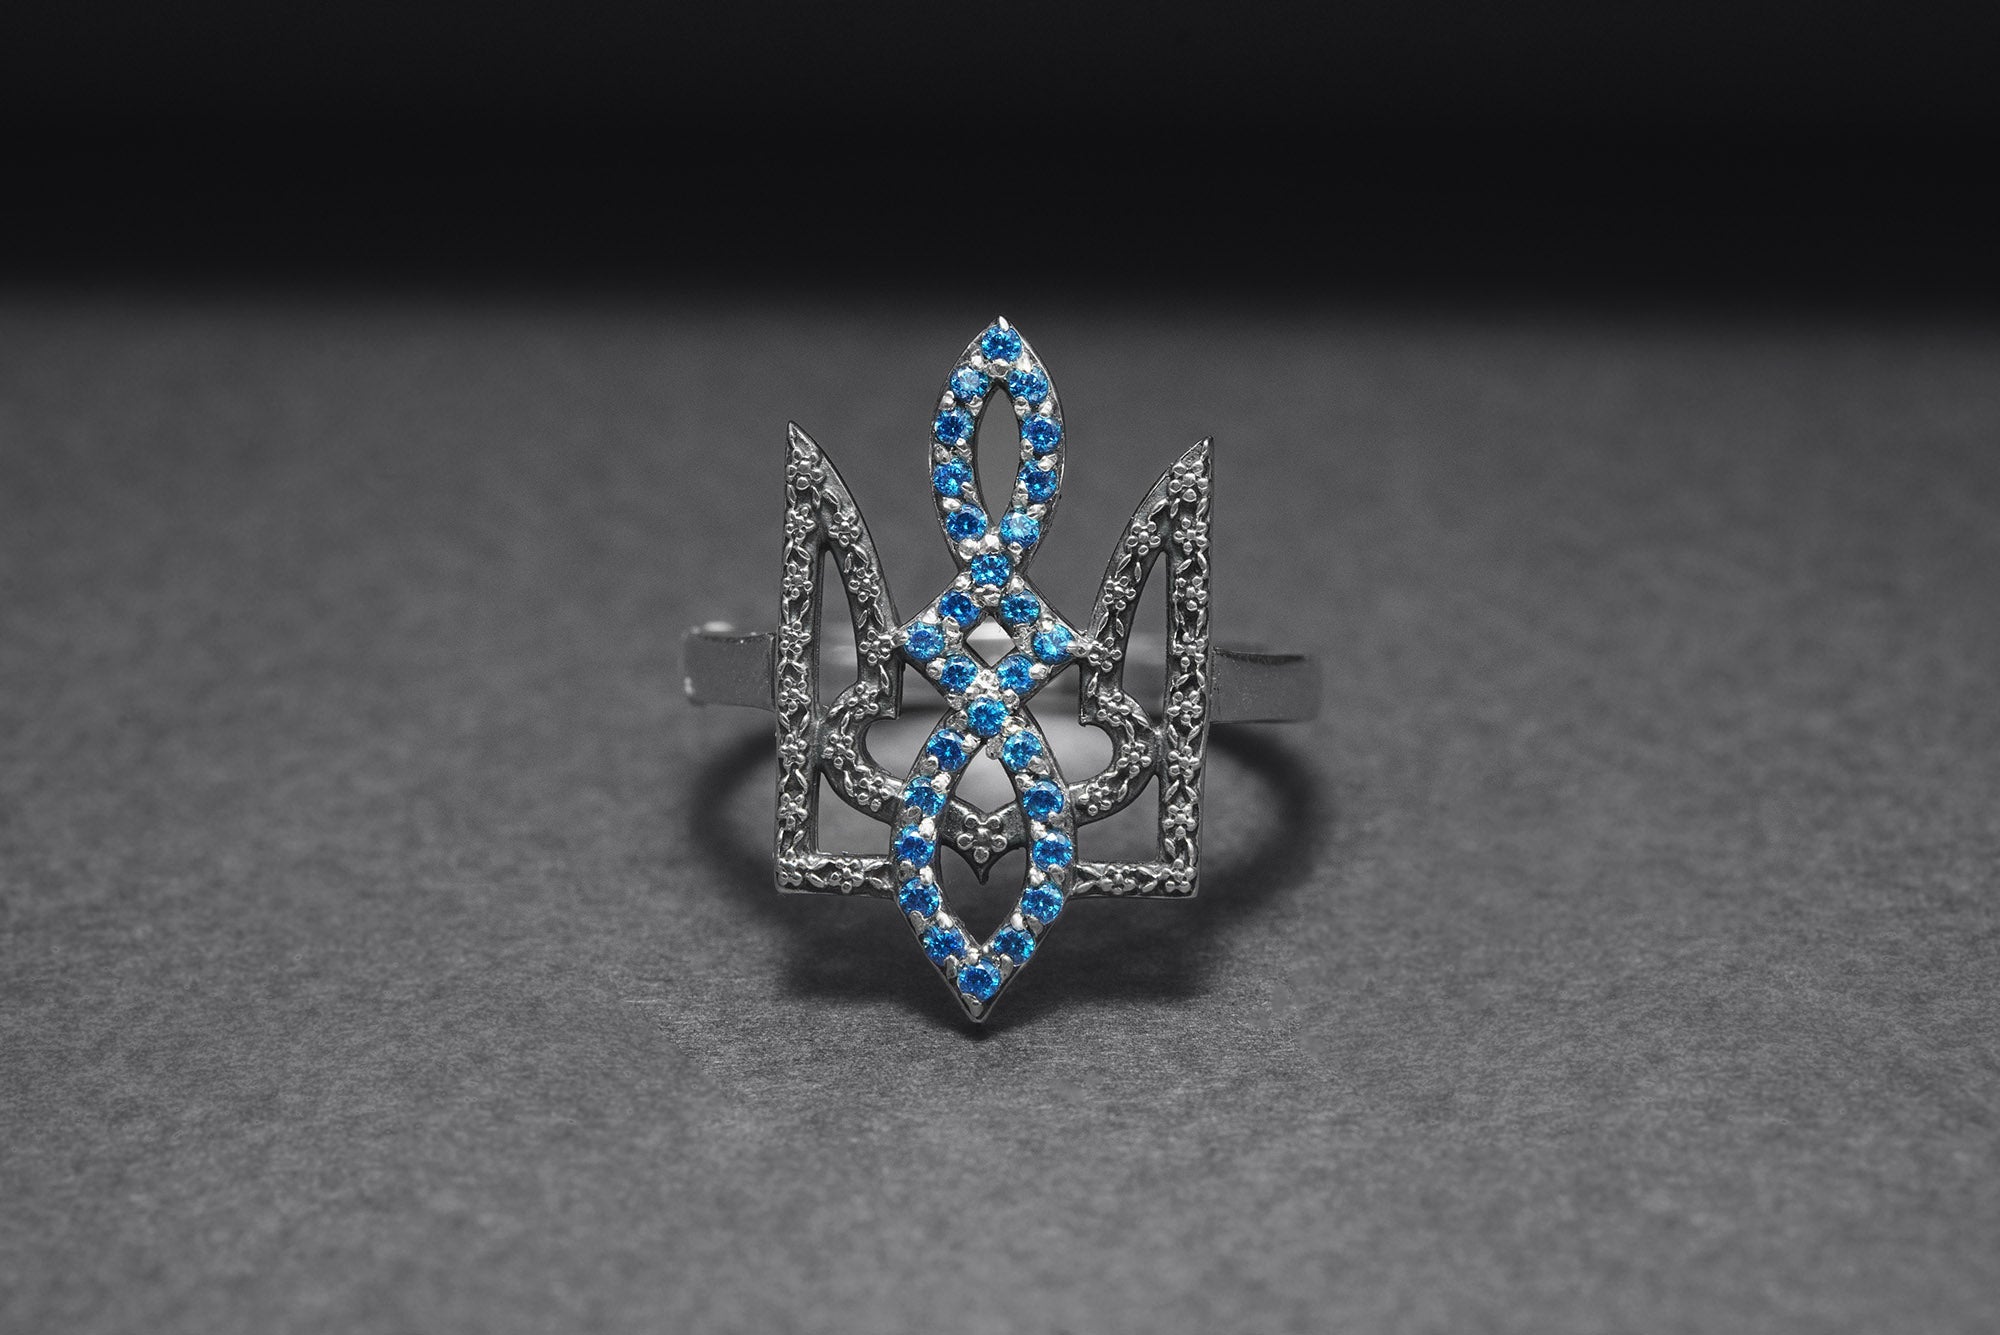 Sterling Silver Ukrainian Trident Ring with Flowers and Blue Gems, Made in Ukraine Jewelry - vikingworkshop